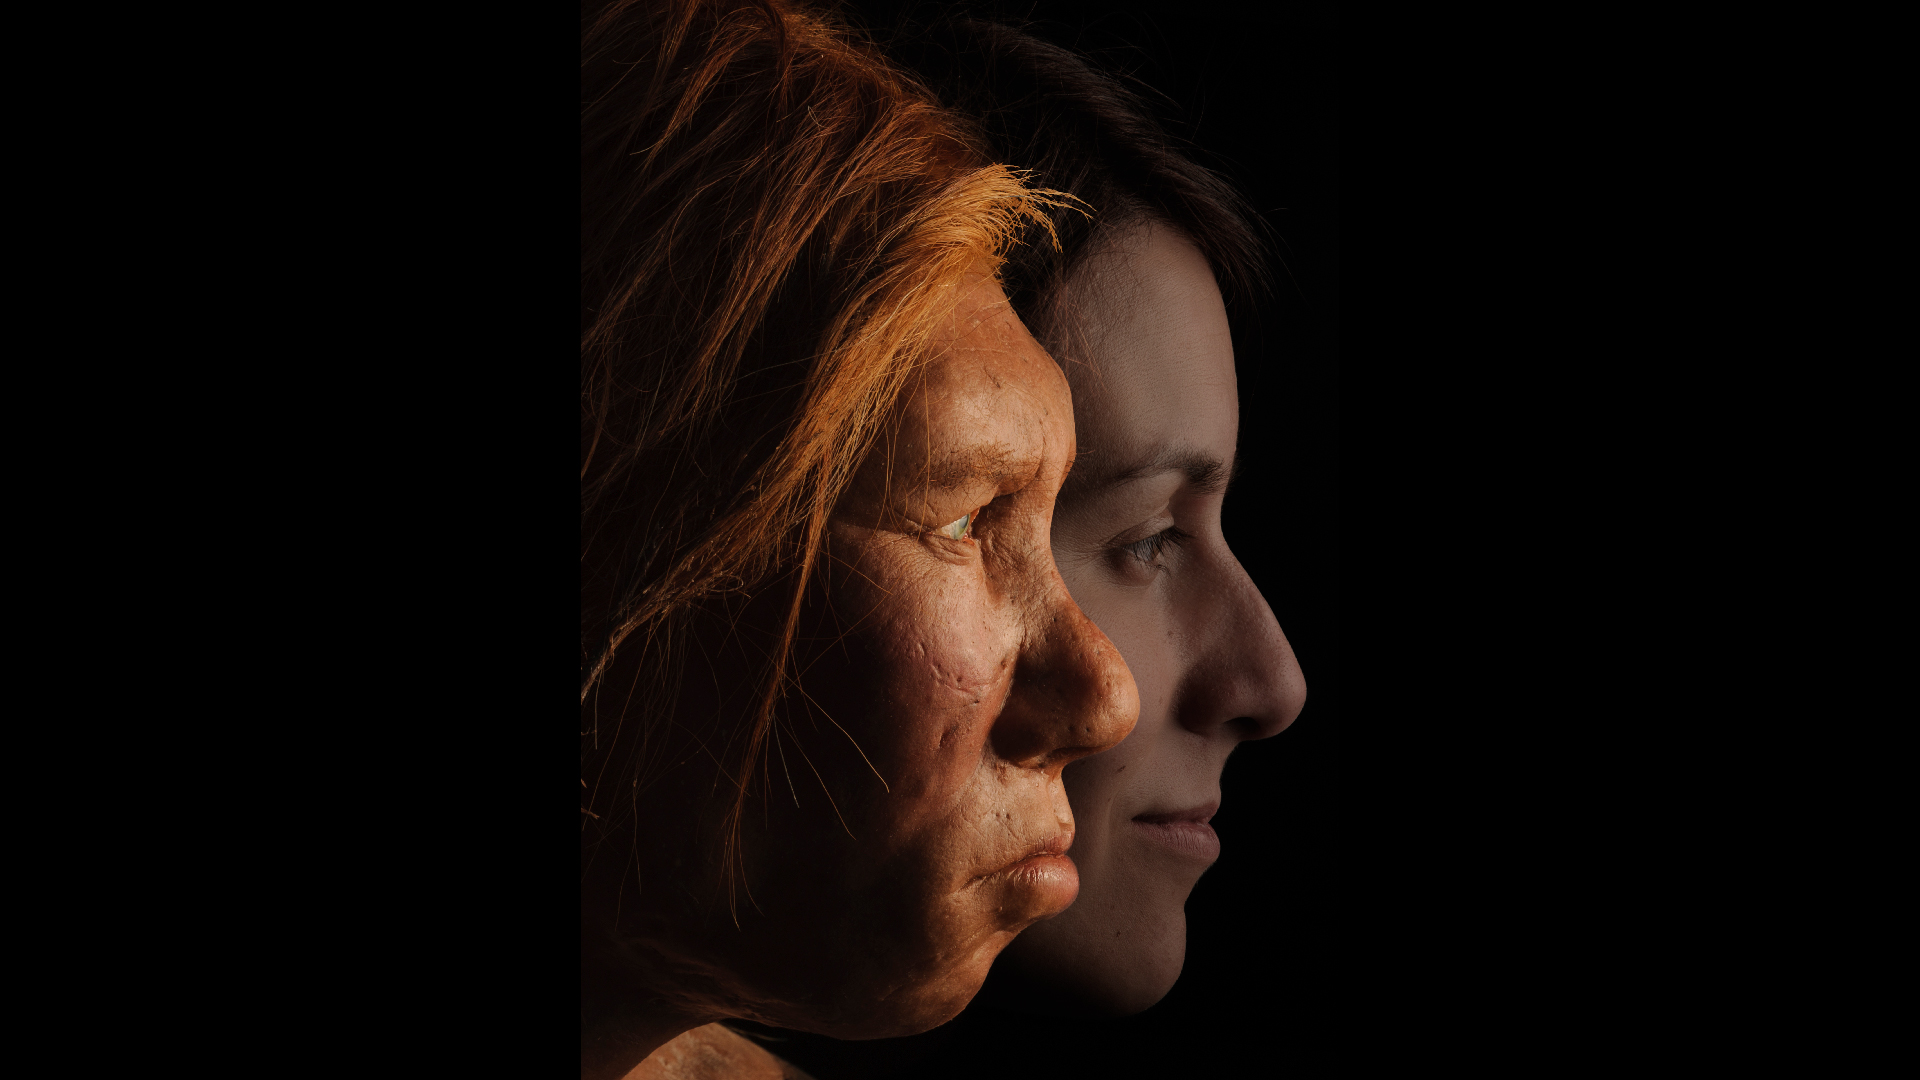 A recreation of a neanderthal woman next to a modern-day human. The neanderthal woman has red hair and ruddy skin.